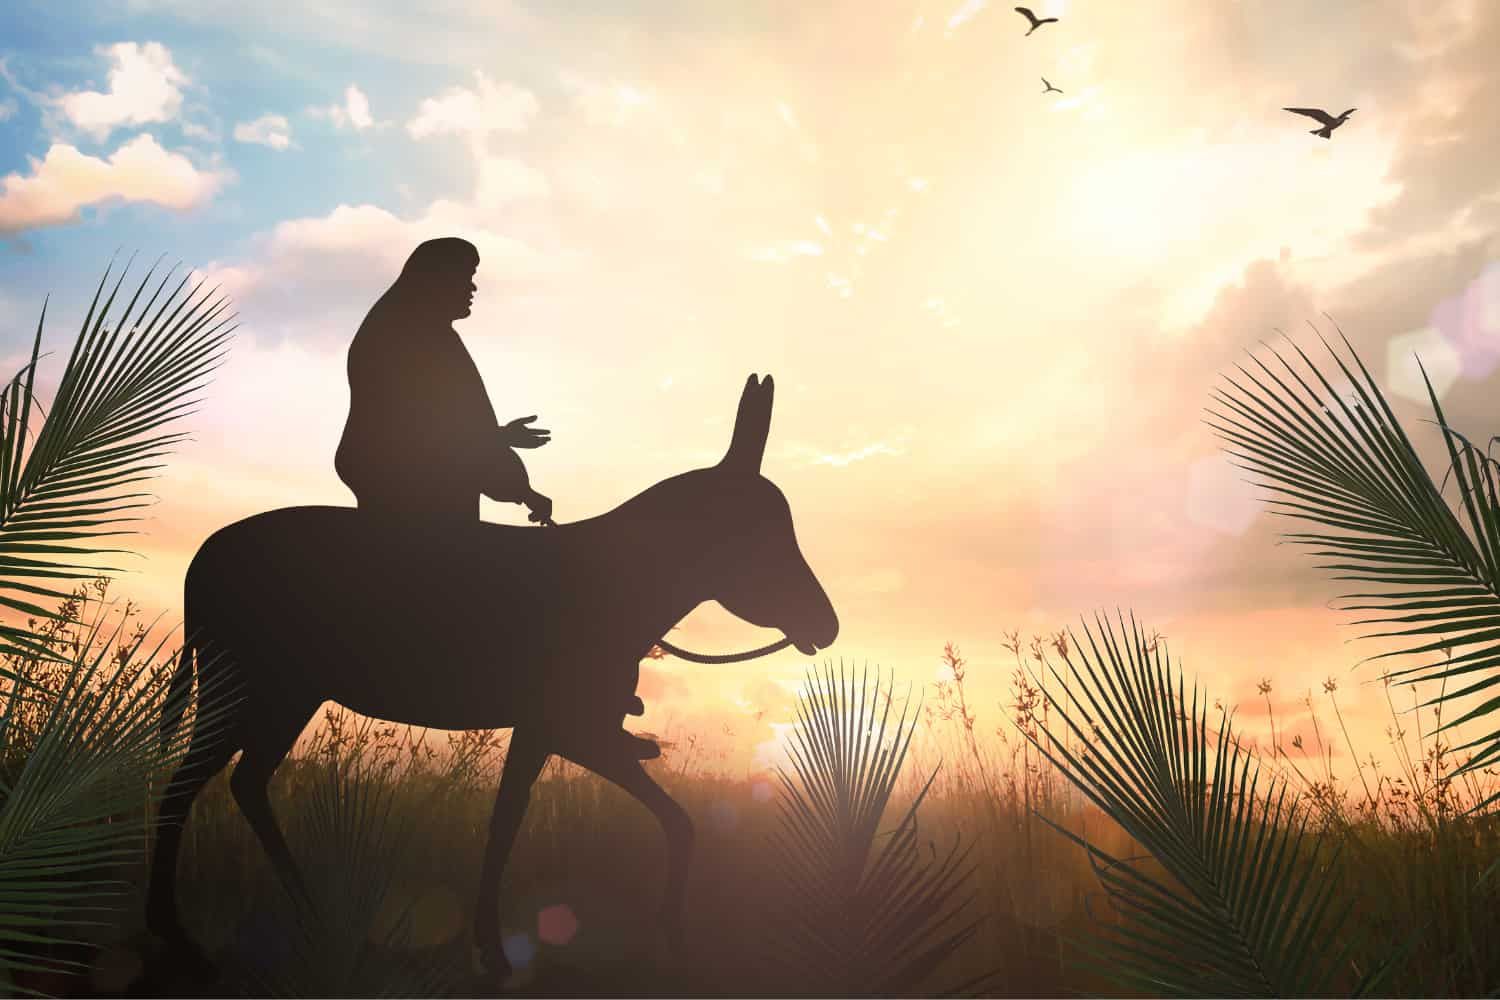 Lesson%20-%20NT%20Easter%2002%20-%20Palm%20Sunday%202%20Humble%20on%20a%20donkey-c3dfbb64 Messiah / Christ